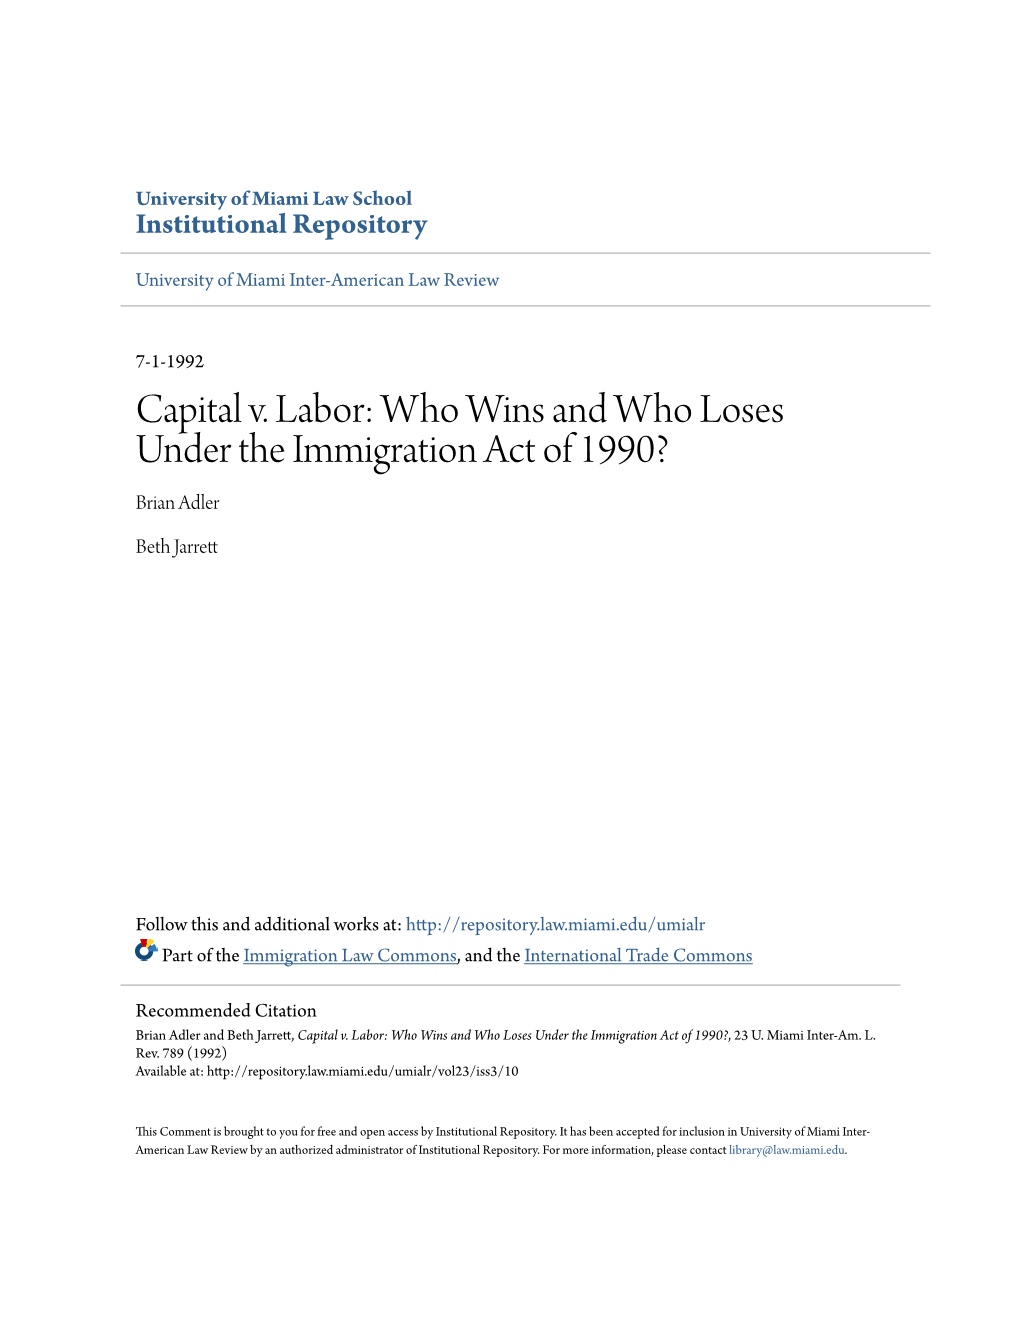 Who Wins and Who Loses Under the Immigration Act of 1990? Brian Adler